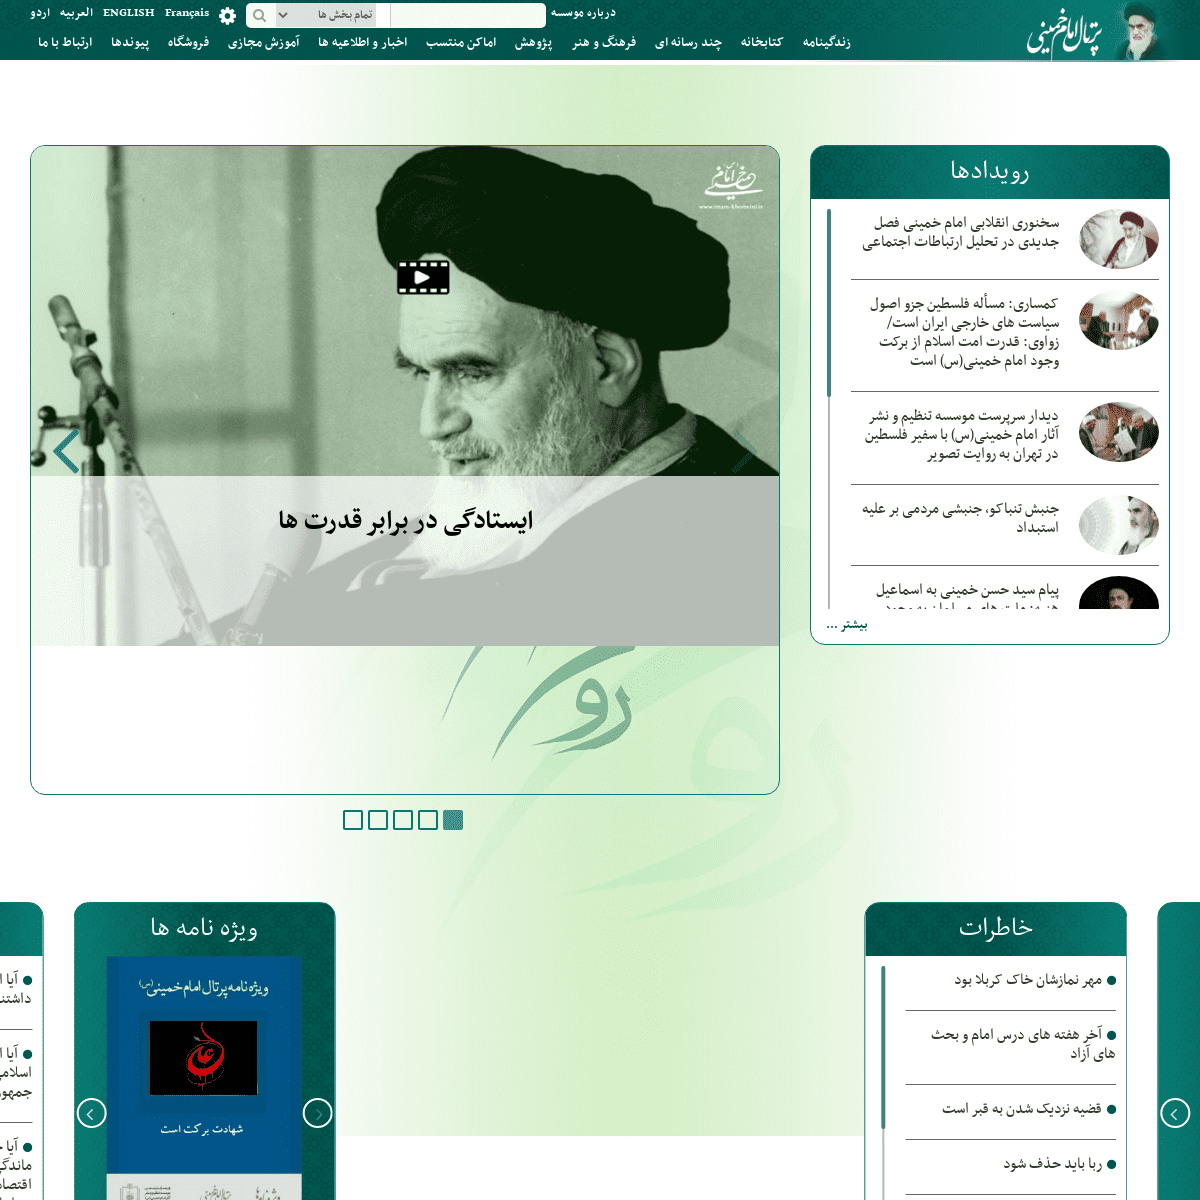 A complete backup of http://www.imam-khomeini.ir/fa/